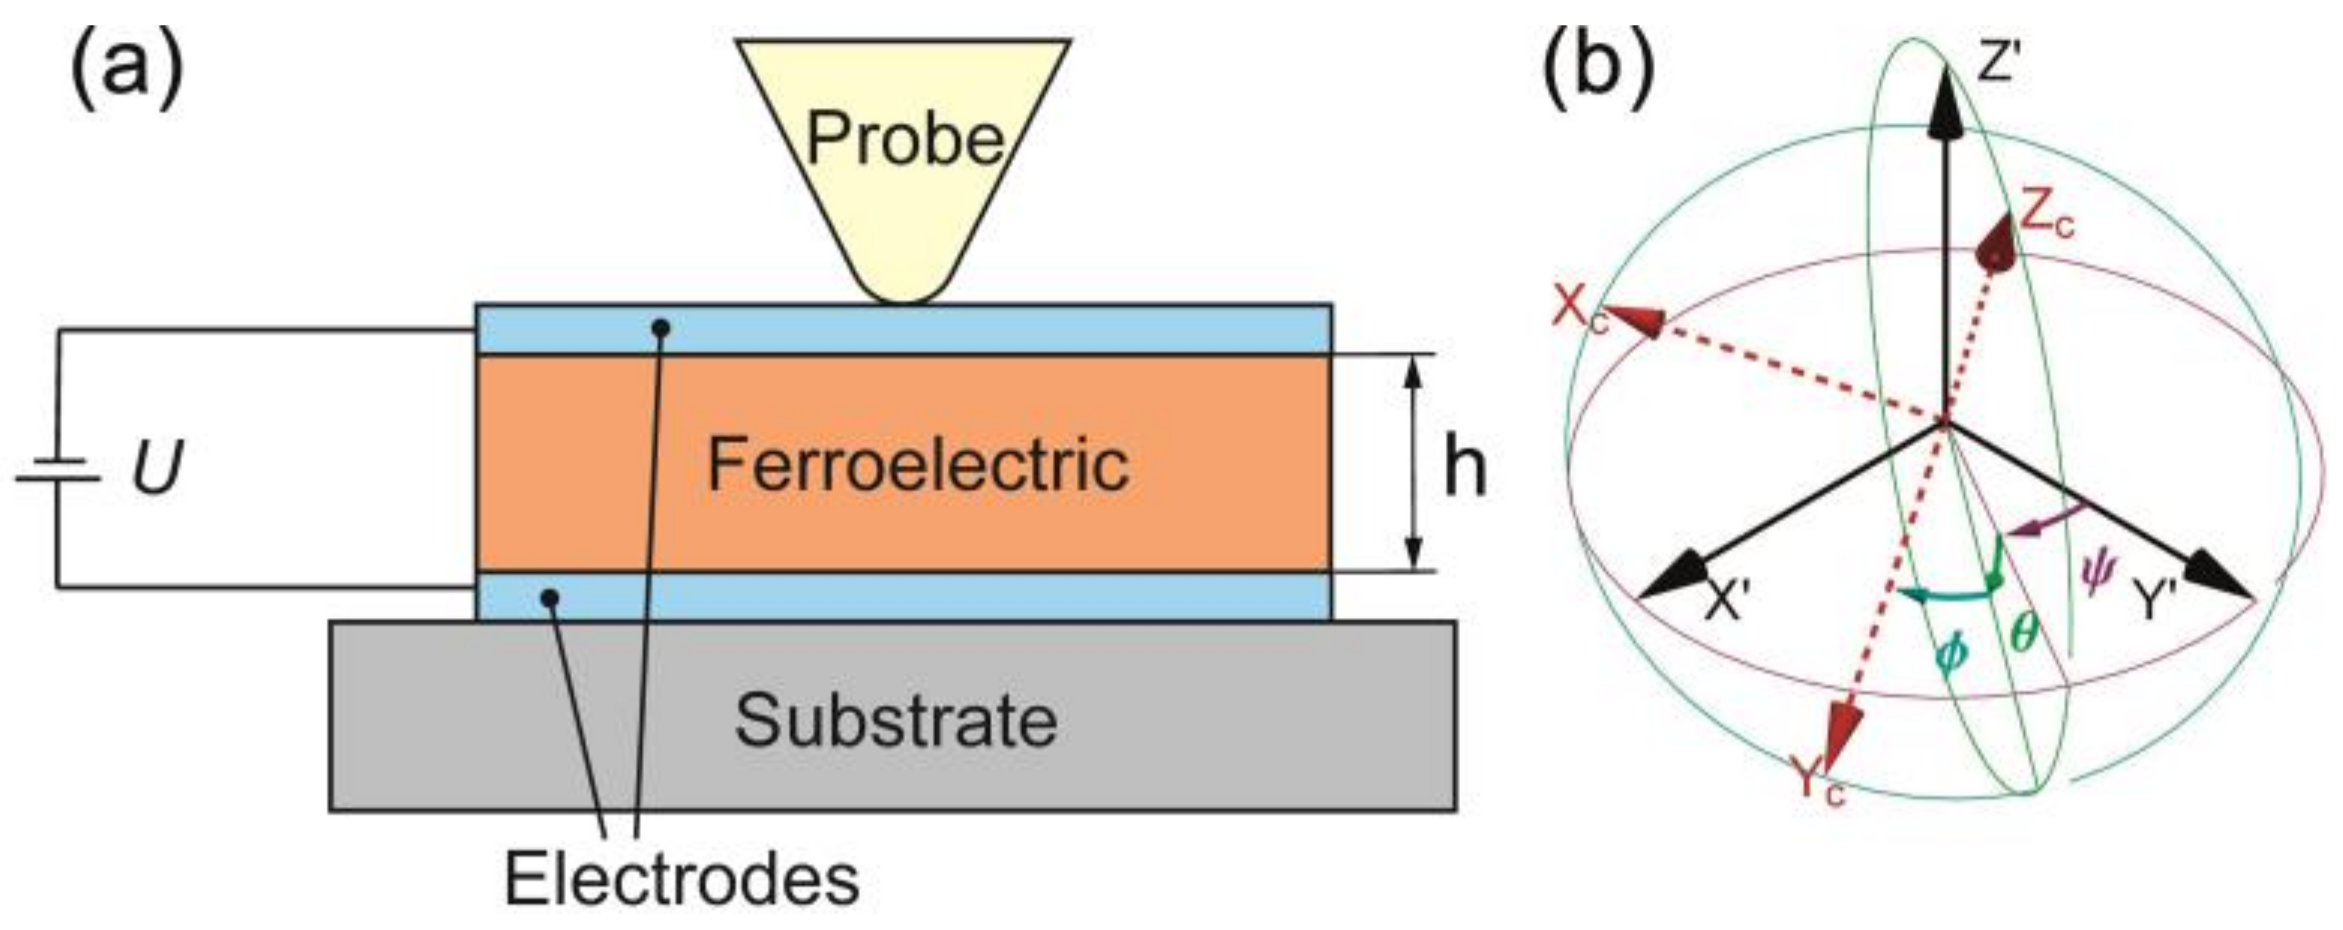 Sensors | Free Full-Text | Piezoresponse in Ferroelectric Materials under  Uniform Electric Field of Electrodes | HTML